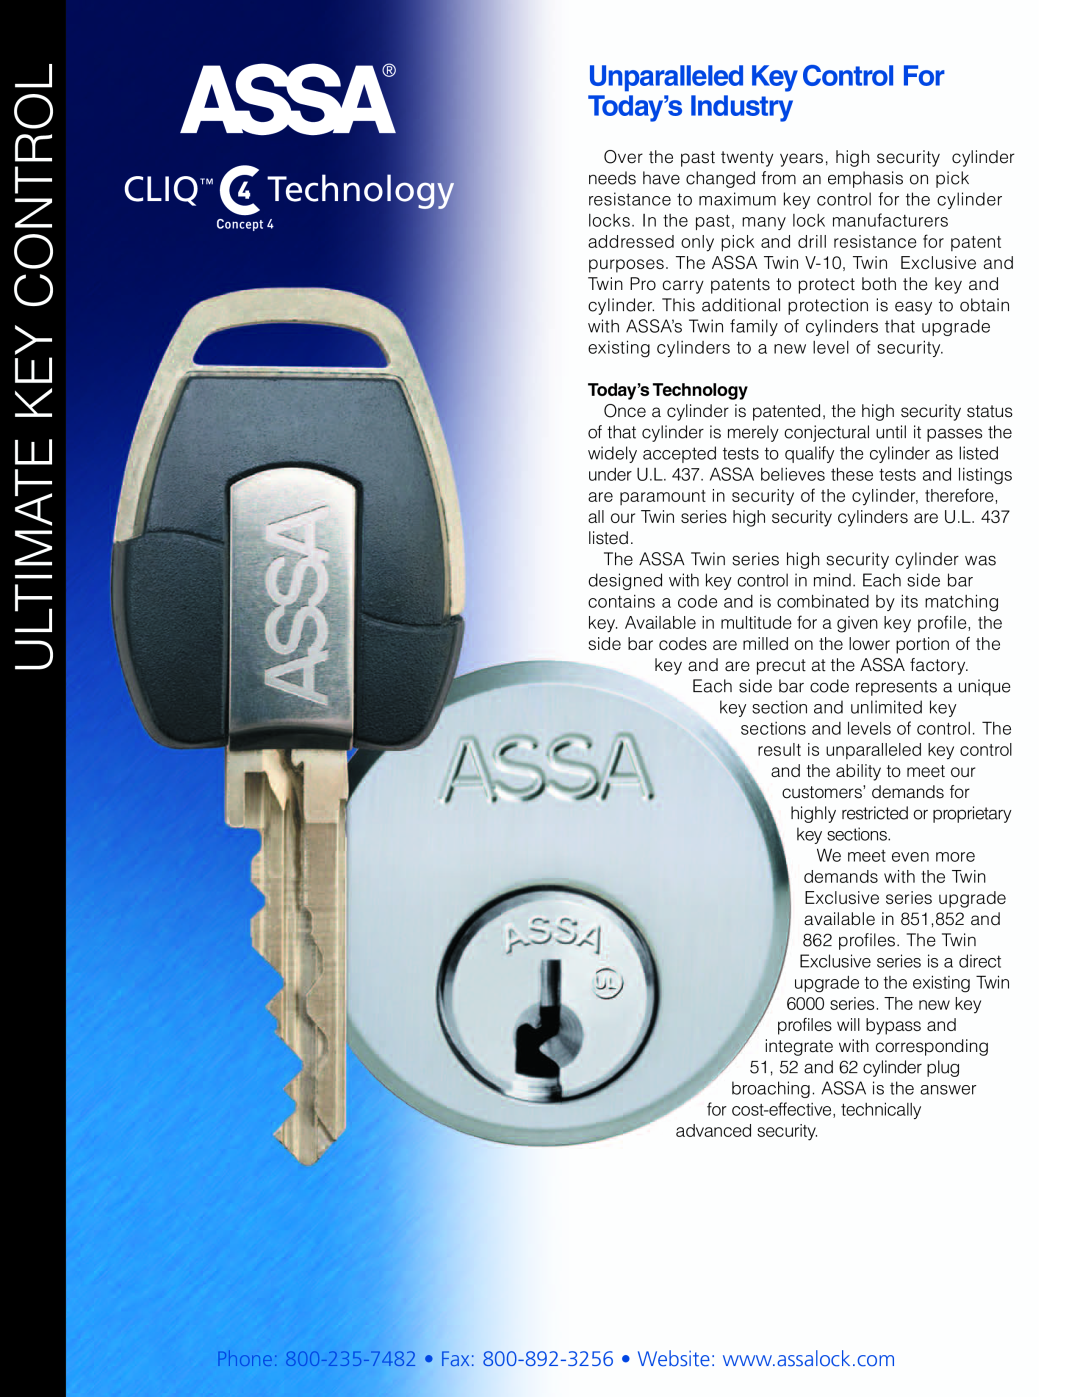 Assa CLIQ, ANSI manual Ultimate Key Control, Unparalleled KeyControl For, Today’s Industry, Today’s Technology, Cliq 